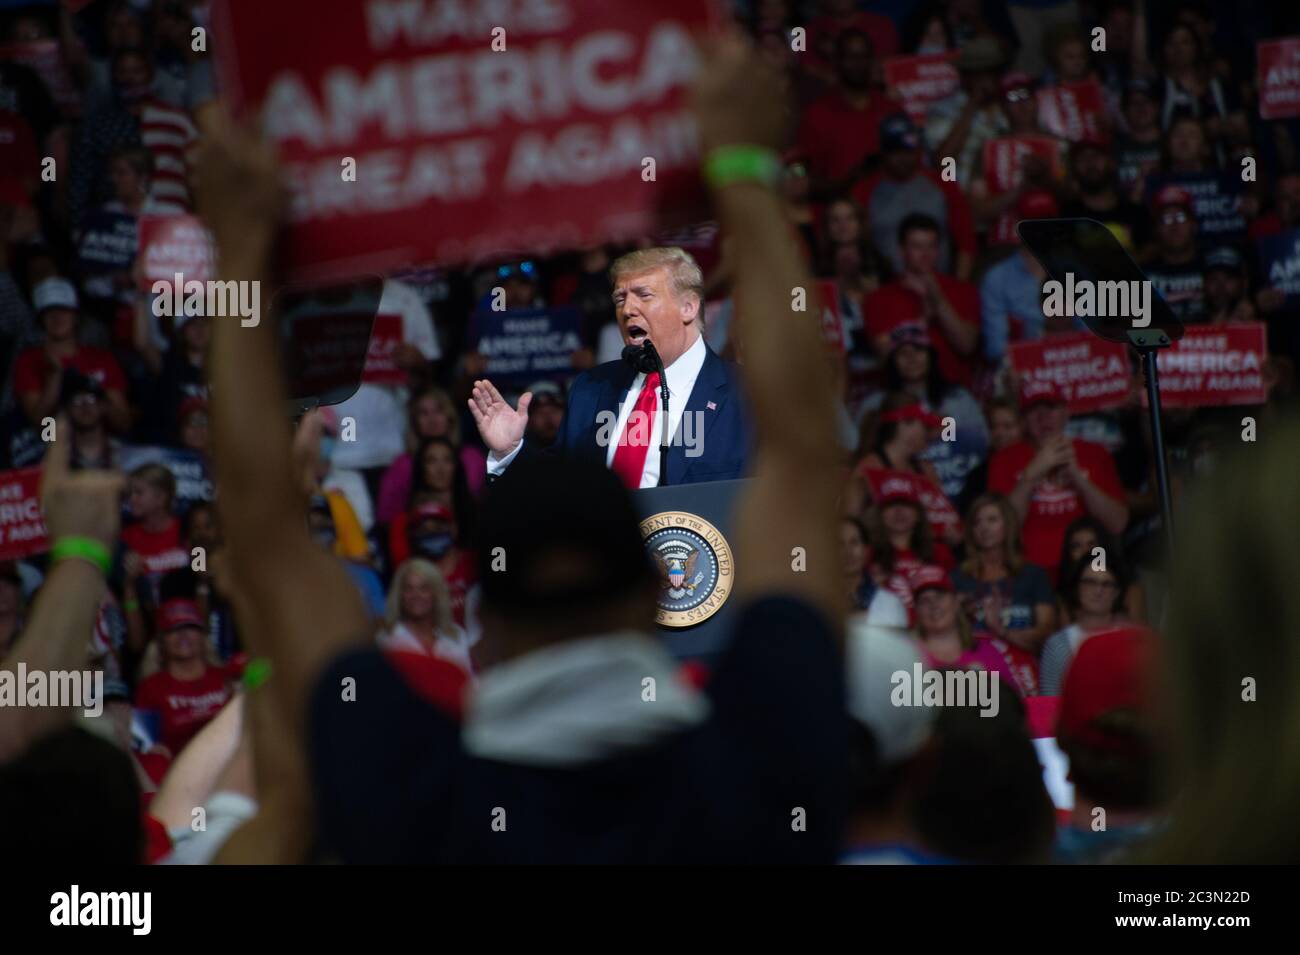 Tulsa, Oklahoma, USA. 20th June, 2020. TULSA, Oklahoma, USA.  - June 20, 2020: US President Donald J. Trump holds campaign rally in Bank of Oklahoma Center. The campaign rally is the first since March 2020 when most of the country locked down due to Covid-19.TULSA, Oklahoma, USA.  - June 20, 2020: US President Donald J. Trump holds campaign rally in Bank of Oklahoma Center. The campaign rally is the first since March 2020 when most of the country locked down due to Covid-19.TULSA, Oklahoma, USA.  - June 20, 2020: US President Donald J. Trump holds campaign rally in Bank of Oklahoma Center. The Stock Photo